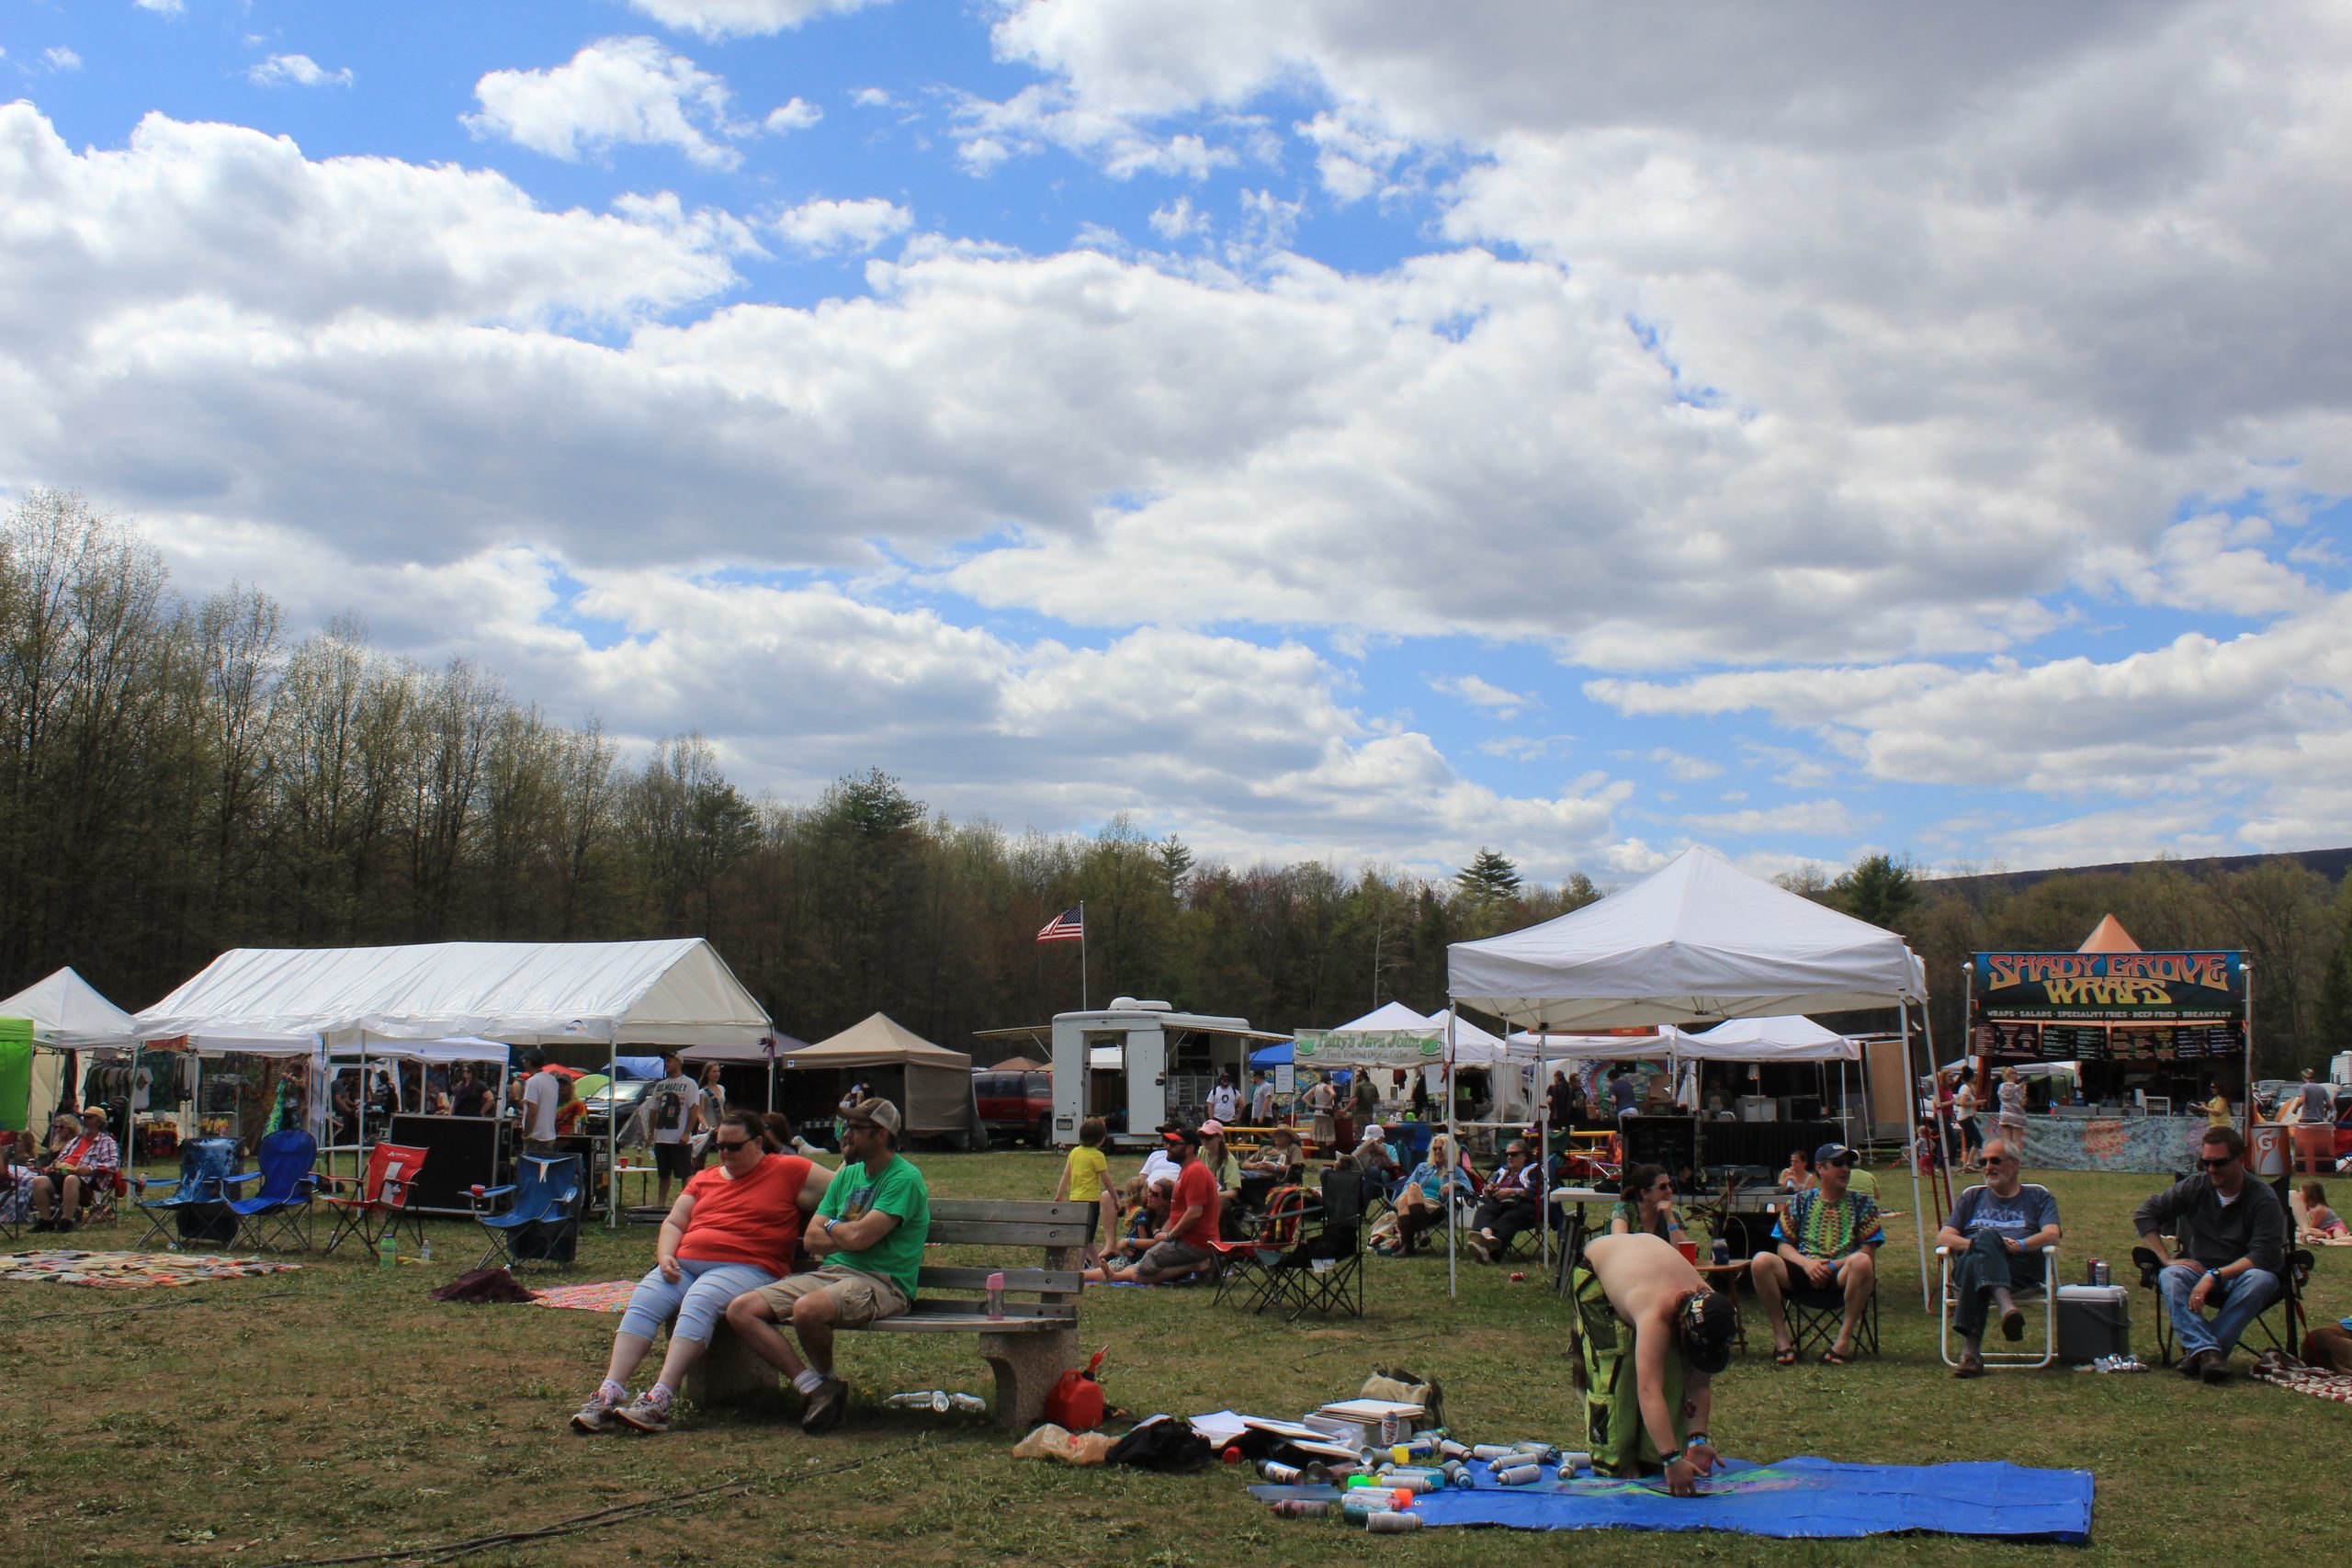 Spring Pickin Bluegrass Festival Review April 30-May 3rd, 2015